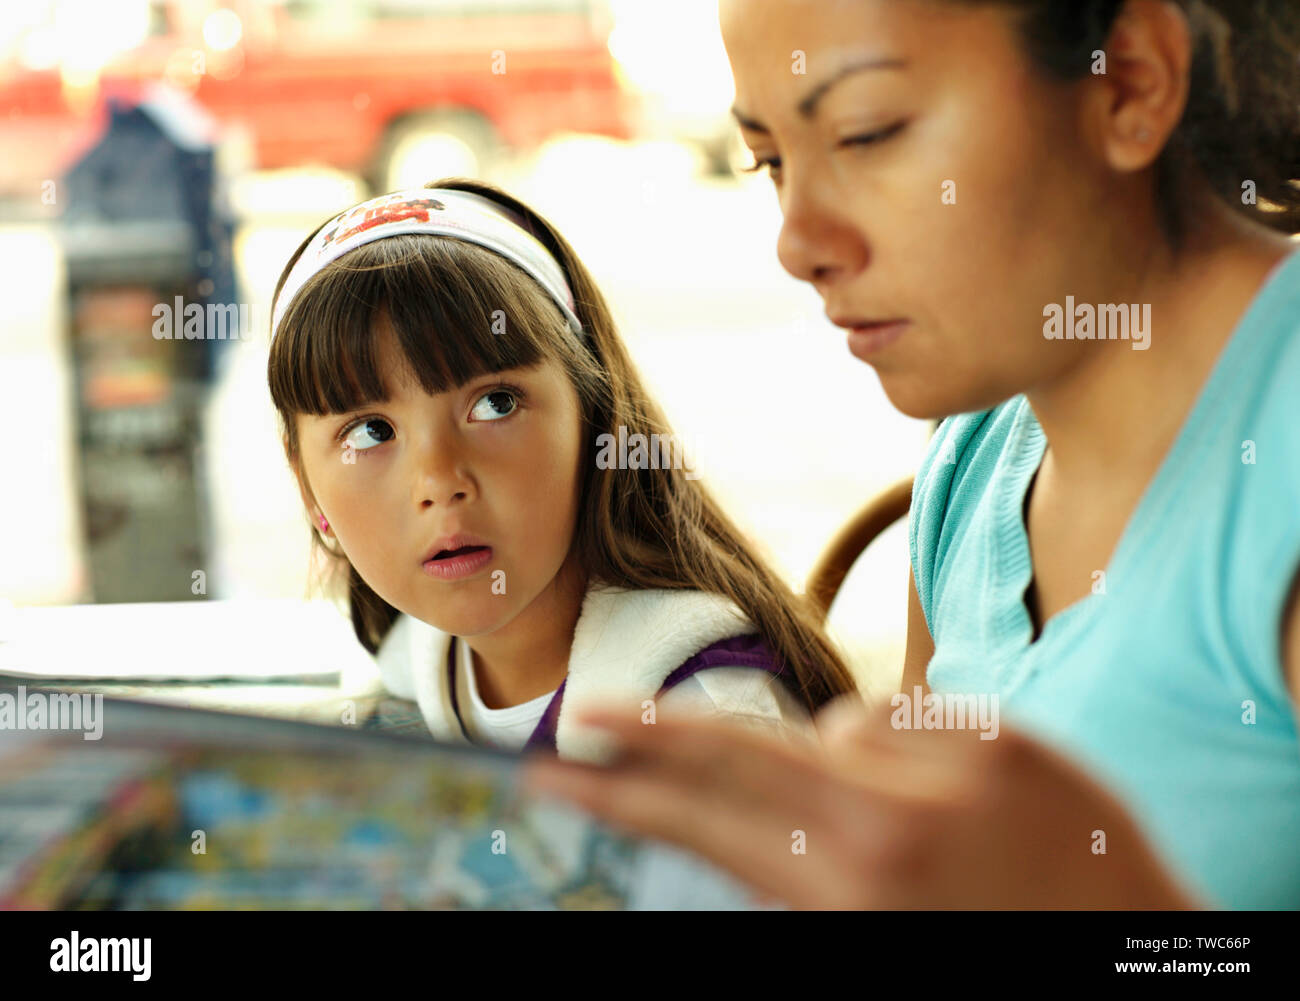 Young girl looks at her mother as she reads a restaurant menu. Stock Photo